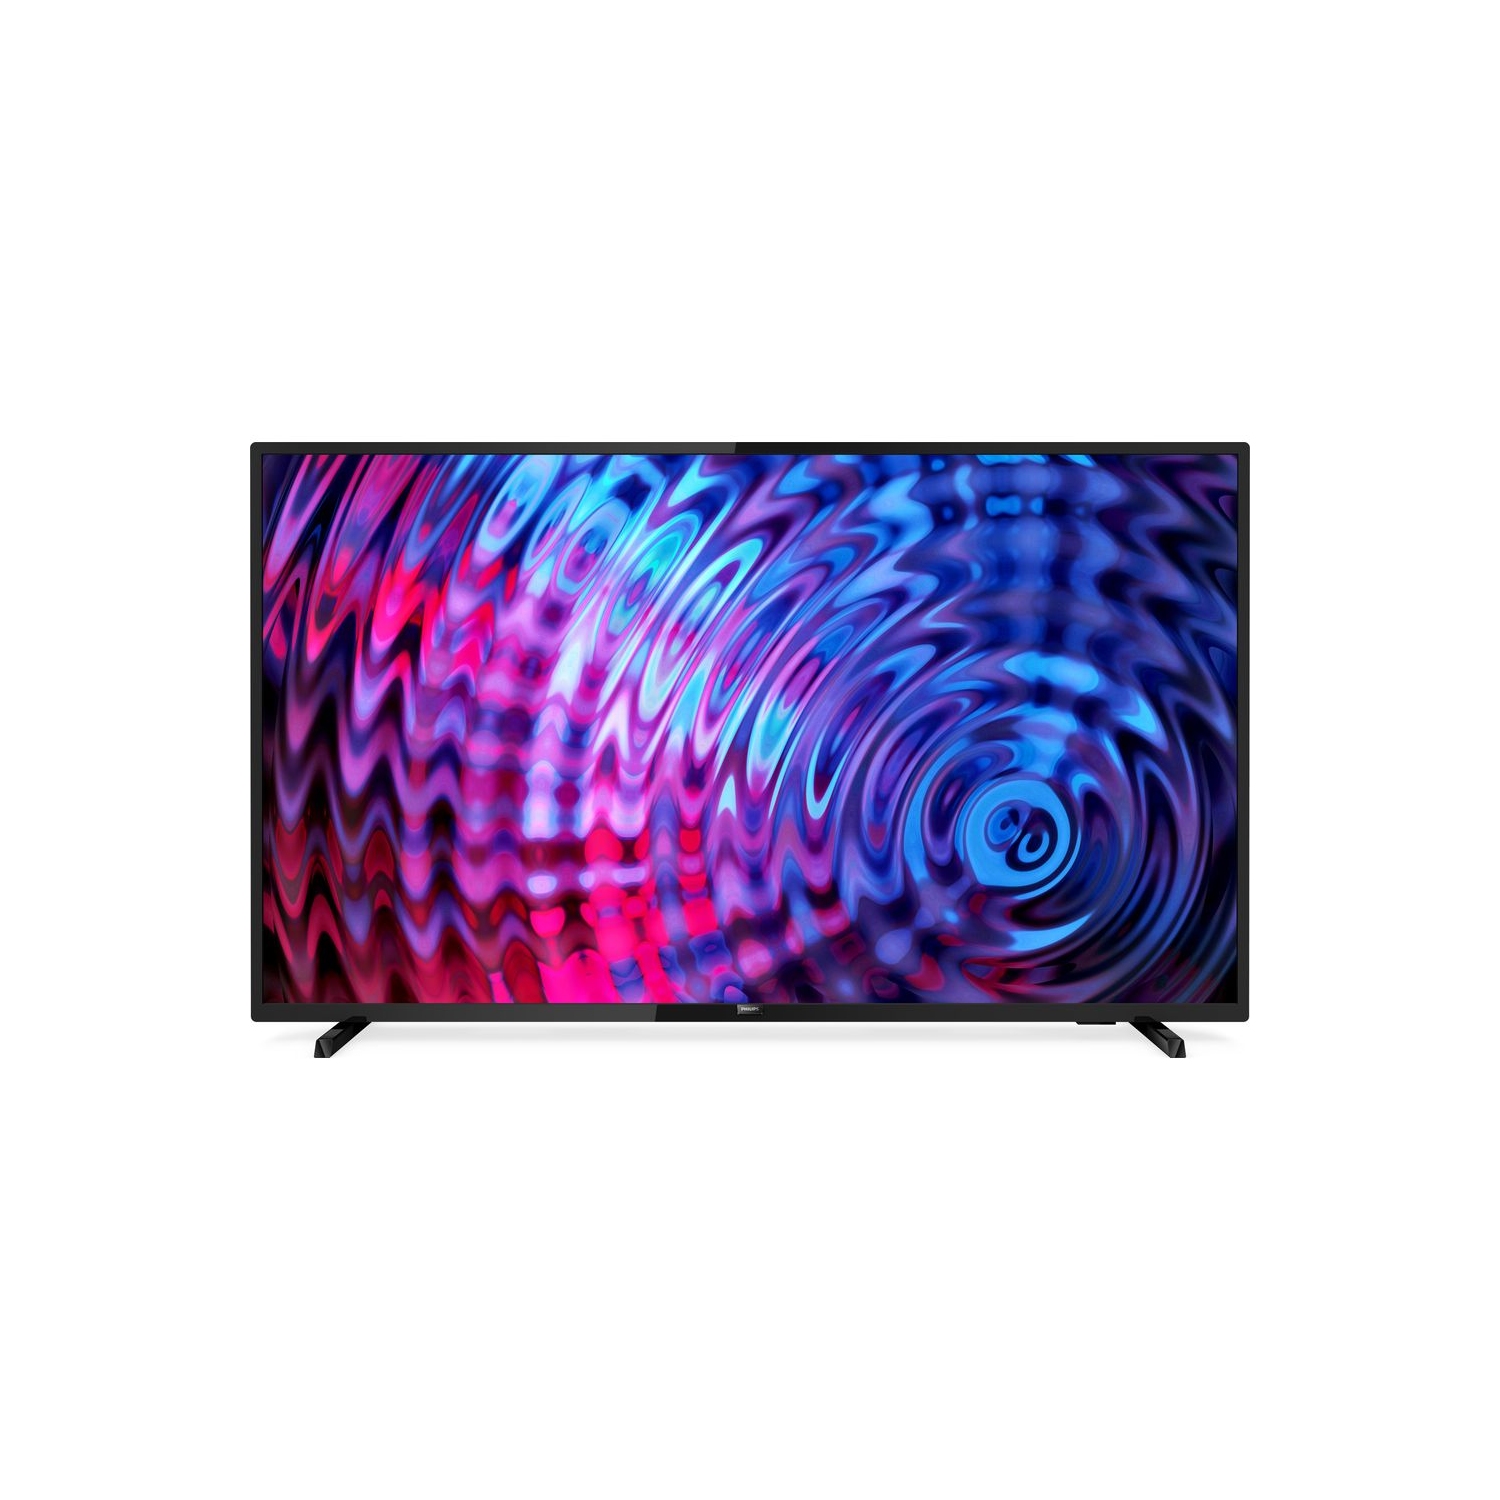 Philips 32PFS5823 Alabaster Cool Silver 32" Smart 1080P Full HD LED TV - 0